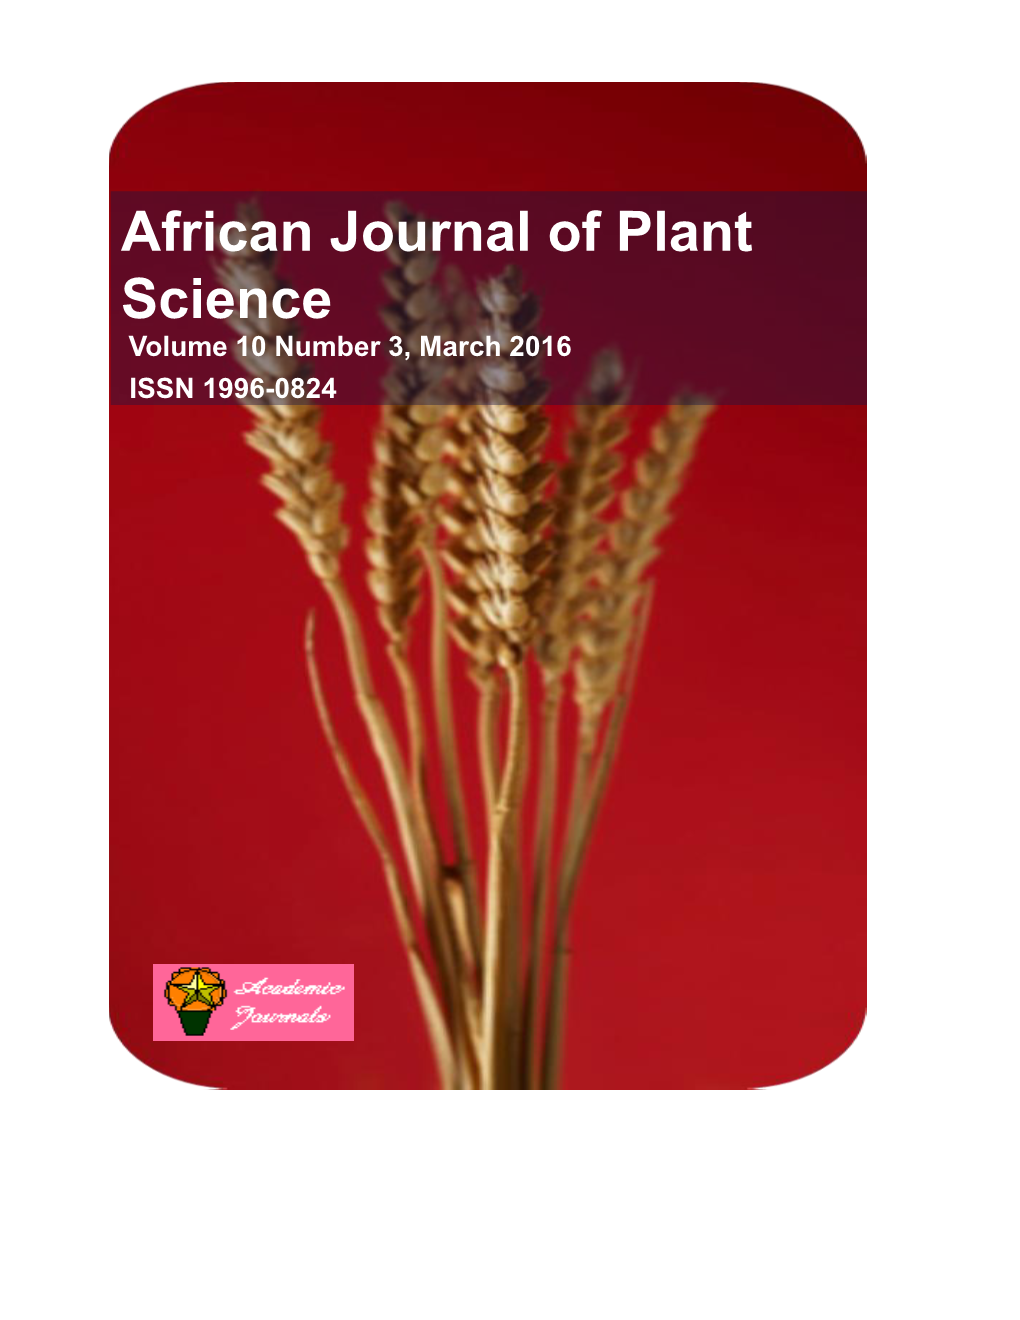 African Journal of Plant Science Volume 10 Number 3, March 2016 ISSN 1996-0824